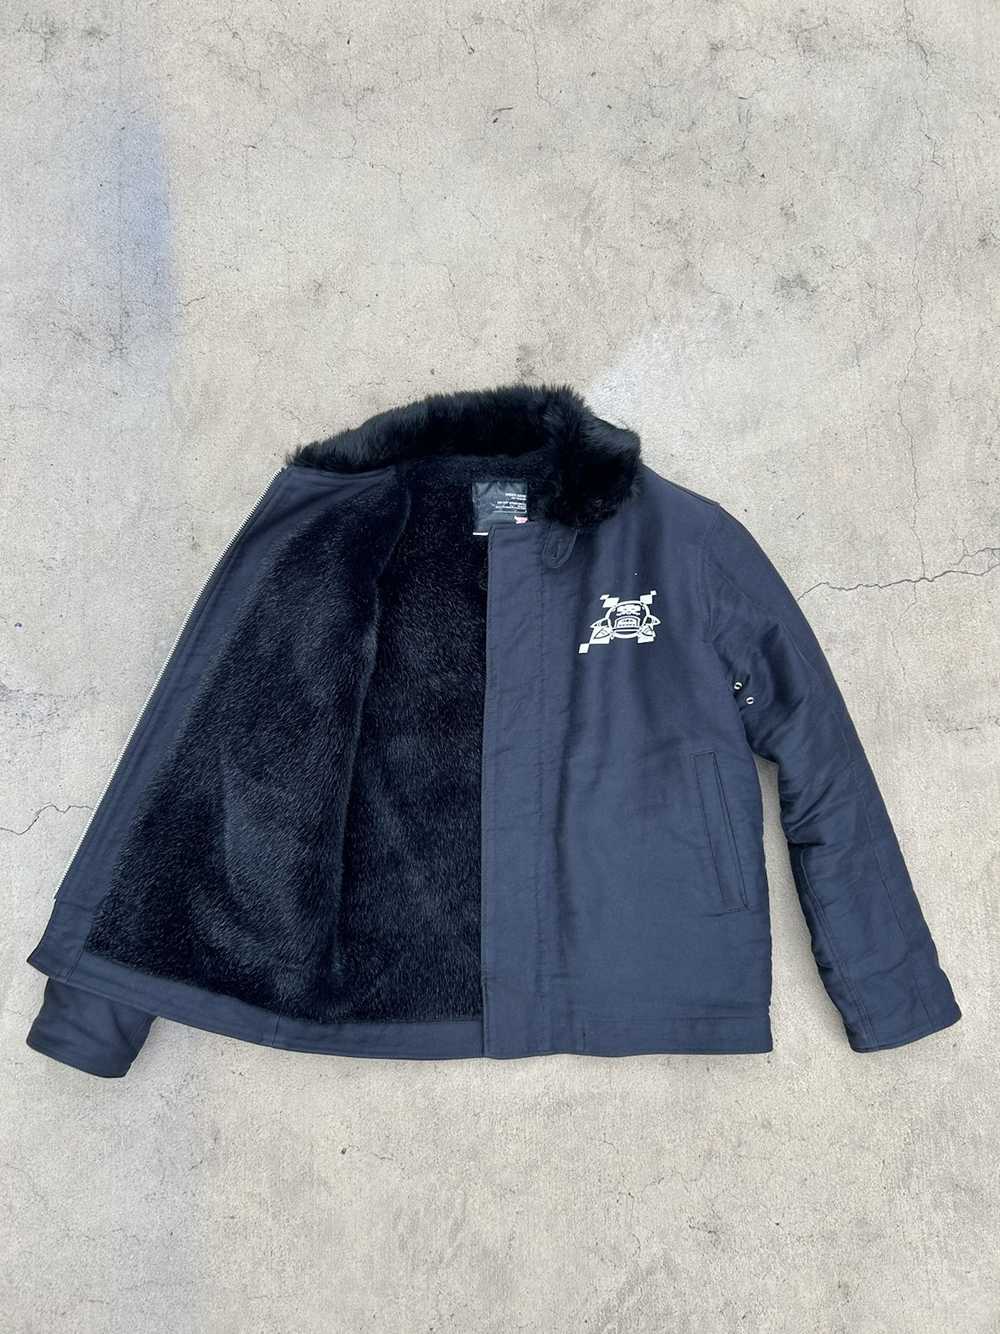 Undercover Undercover AW01 DAVF fur deck jacket - image 3